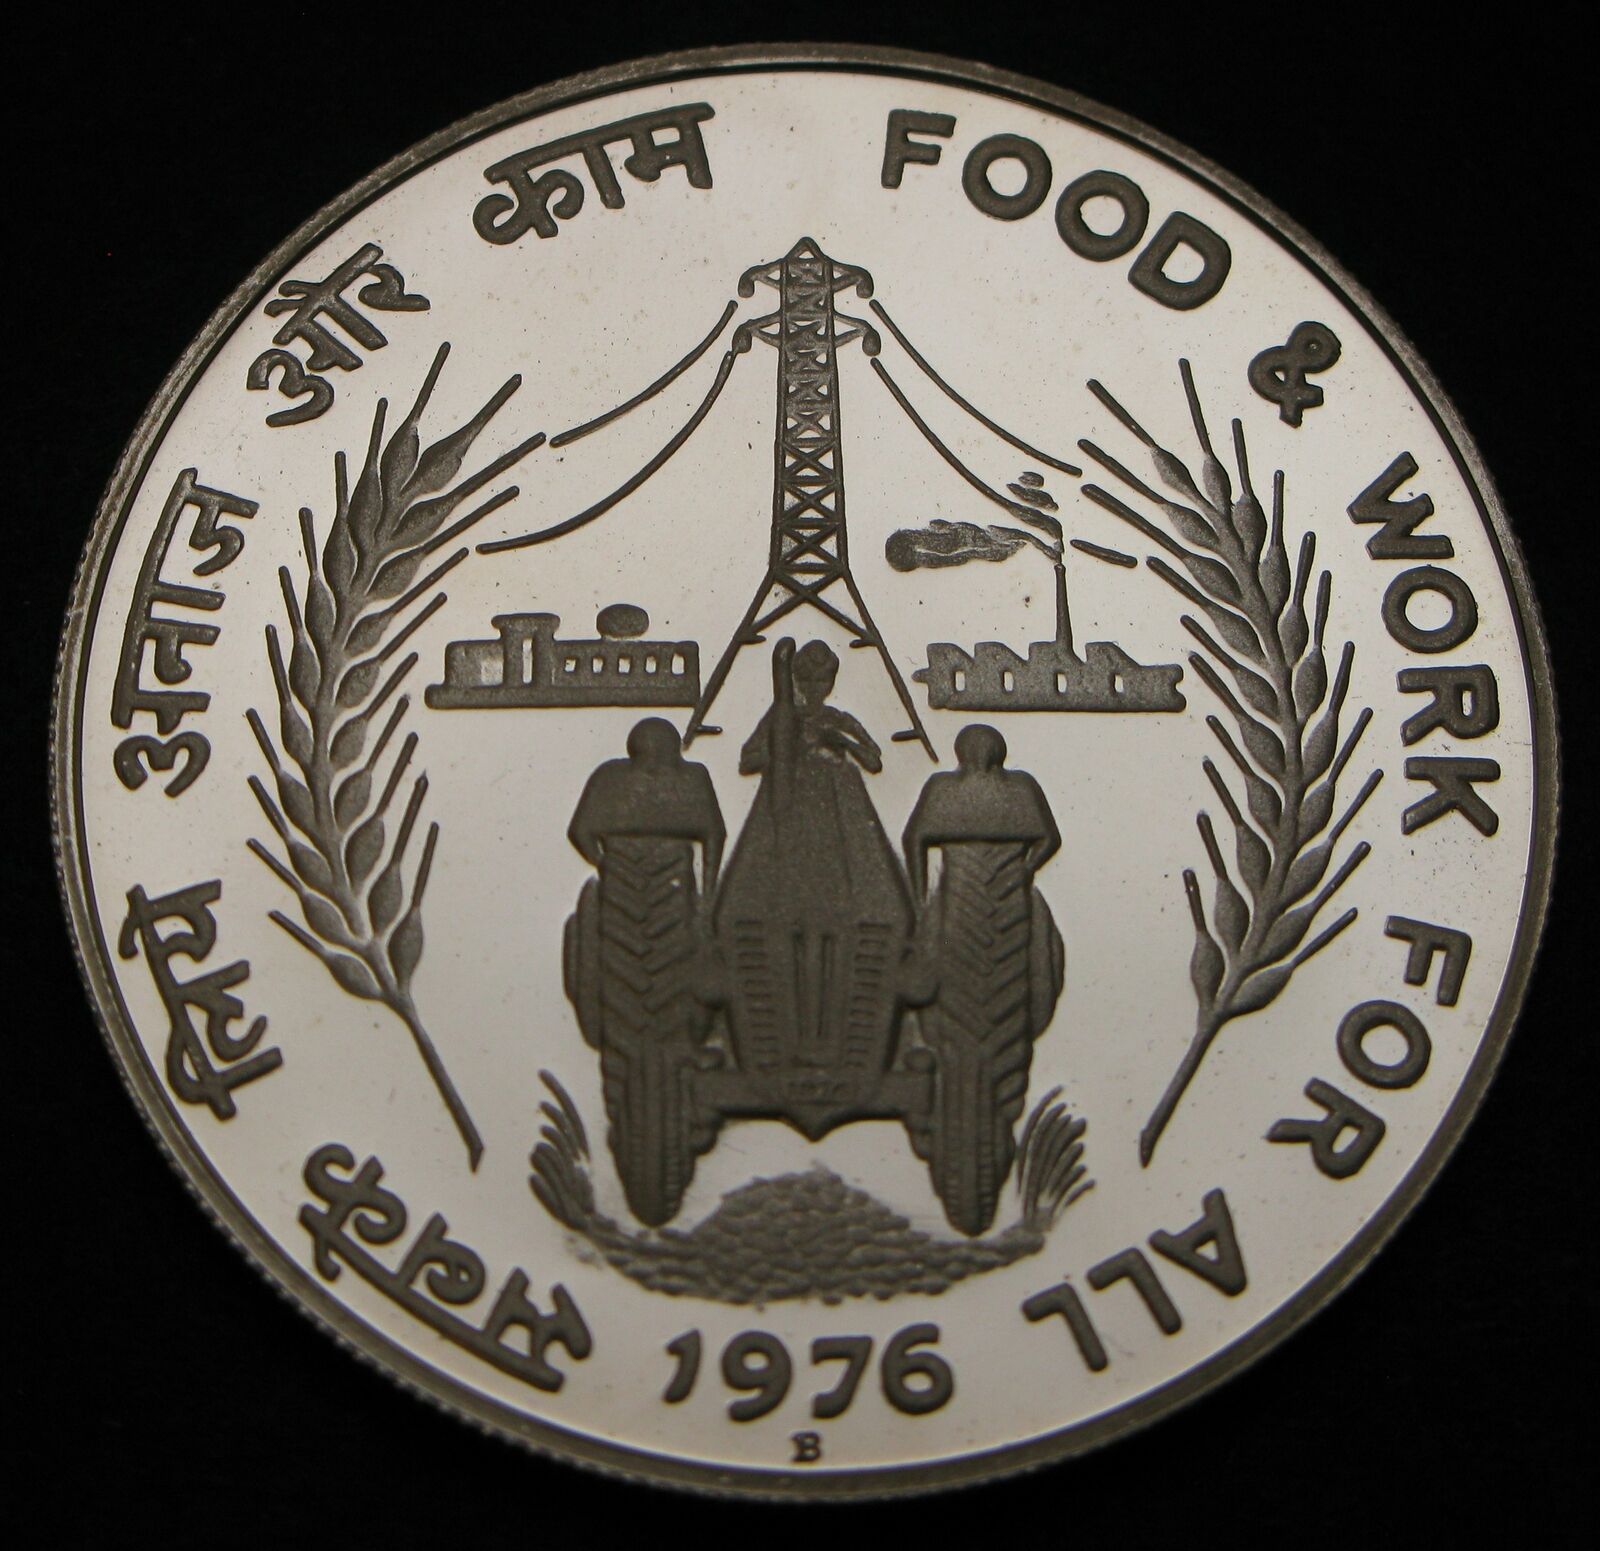 INDIA 50 Indefinitely Popular brand Rupees 1976 B Proof - 0.500 and For Silver Food Work